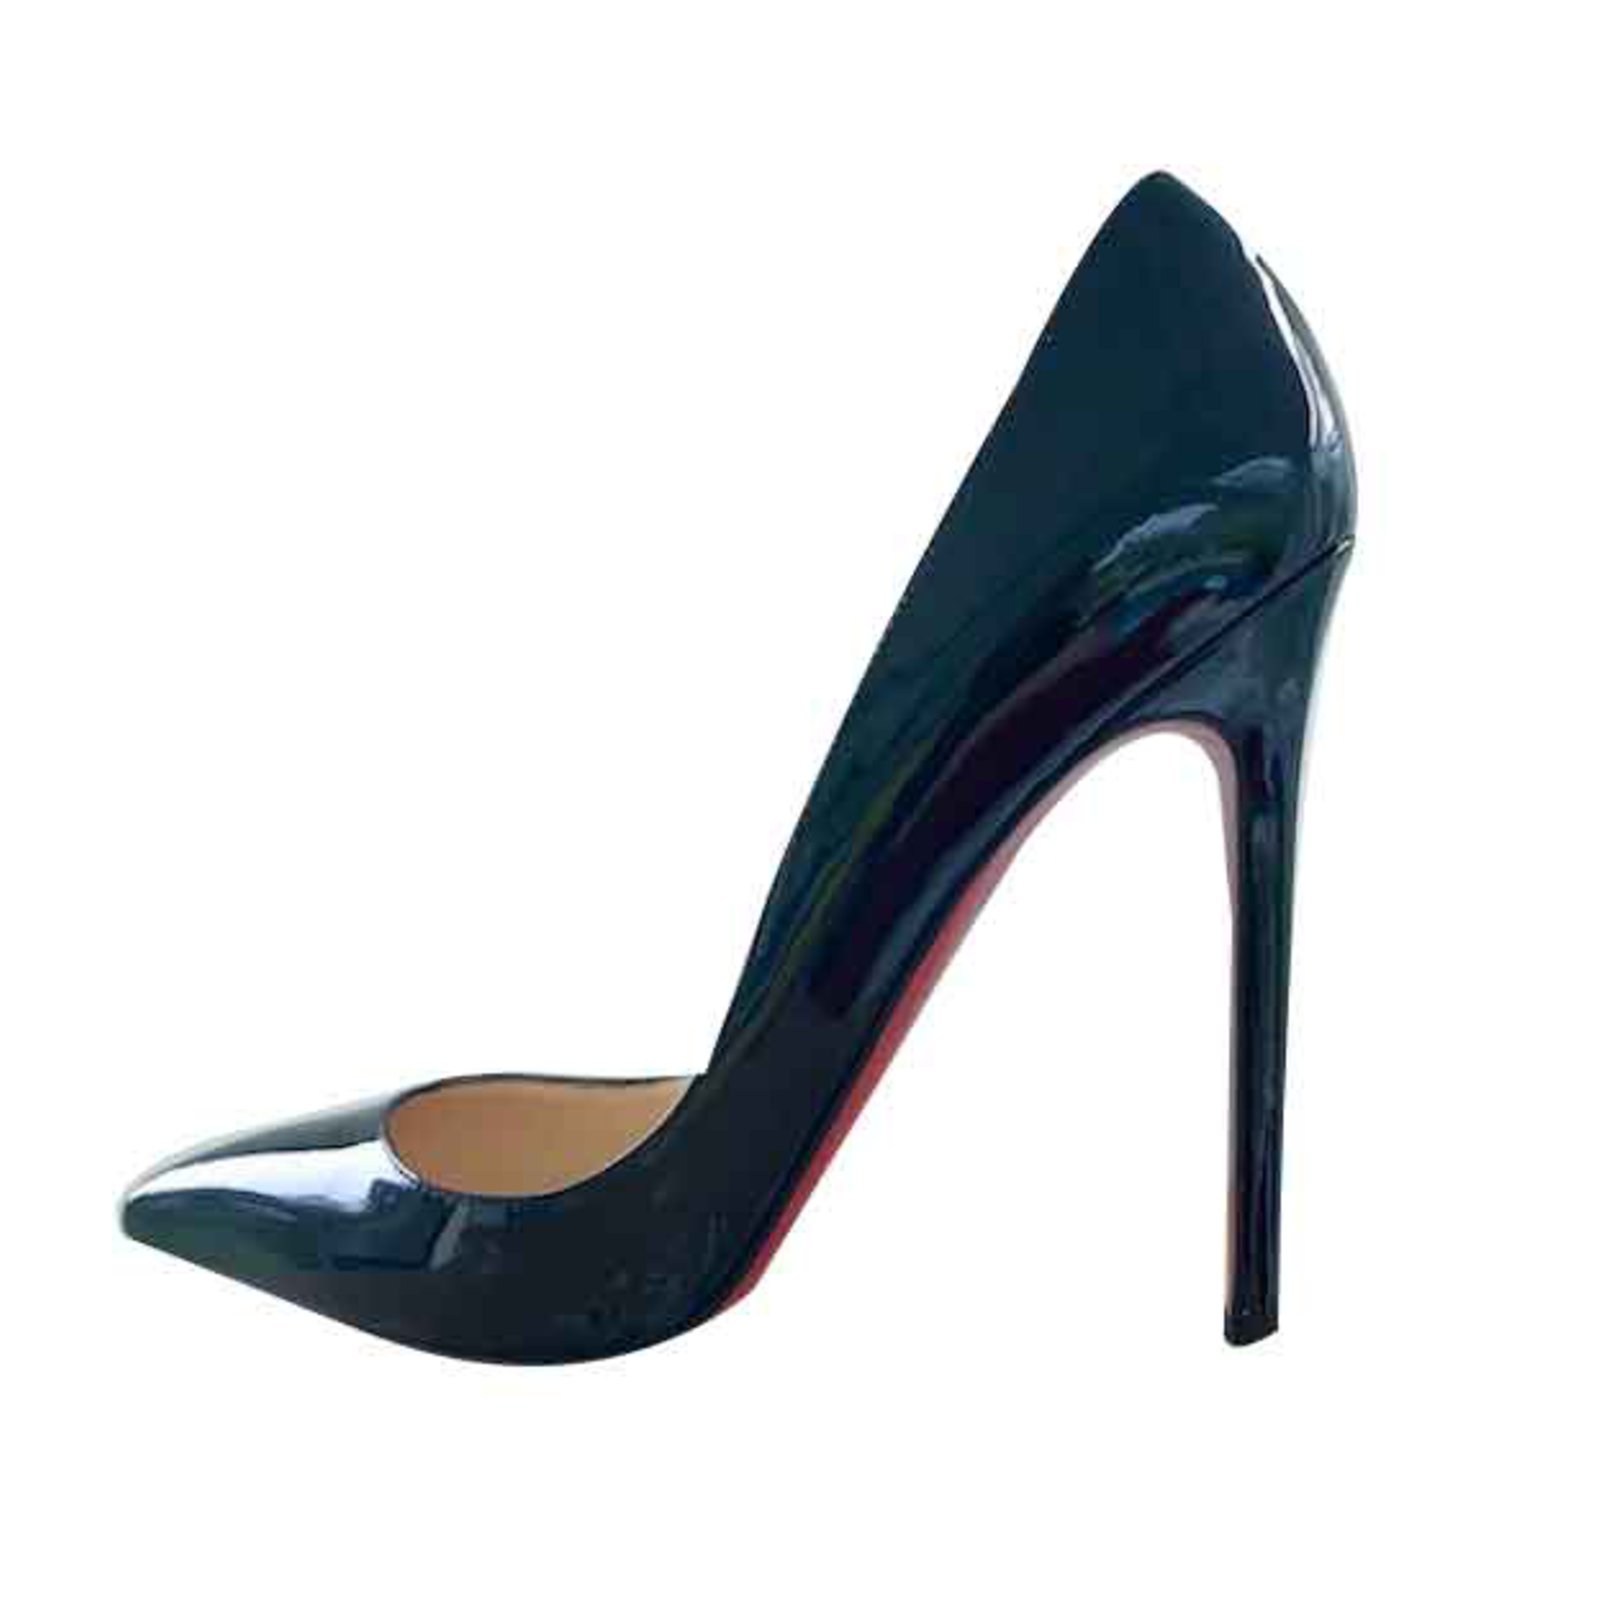 Christian Louboutin Pigalle Follies 100mm Patent Nicograf 